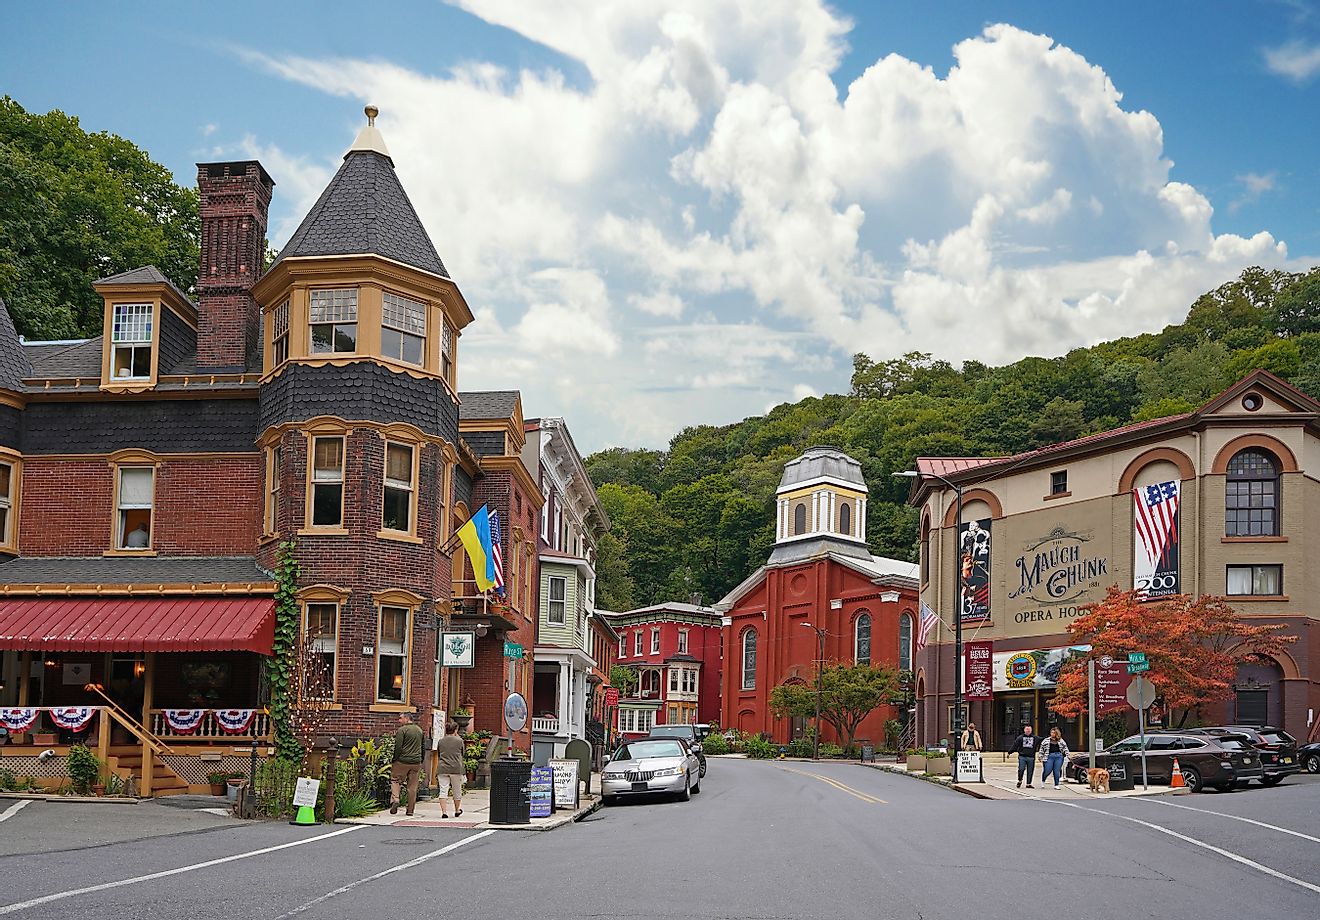 The Mauch Chunk Opera House in historic downtown Jim Thorpe